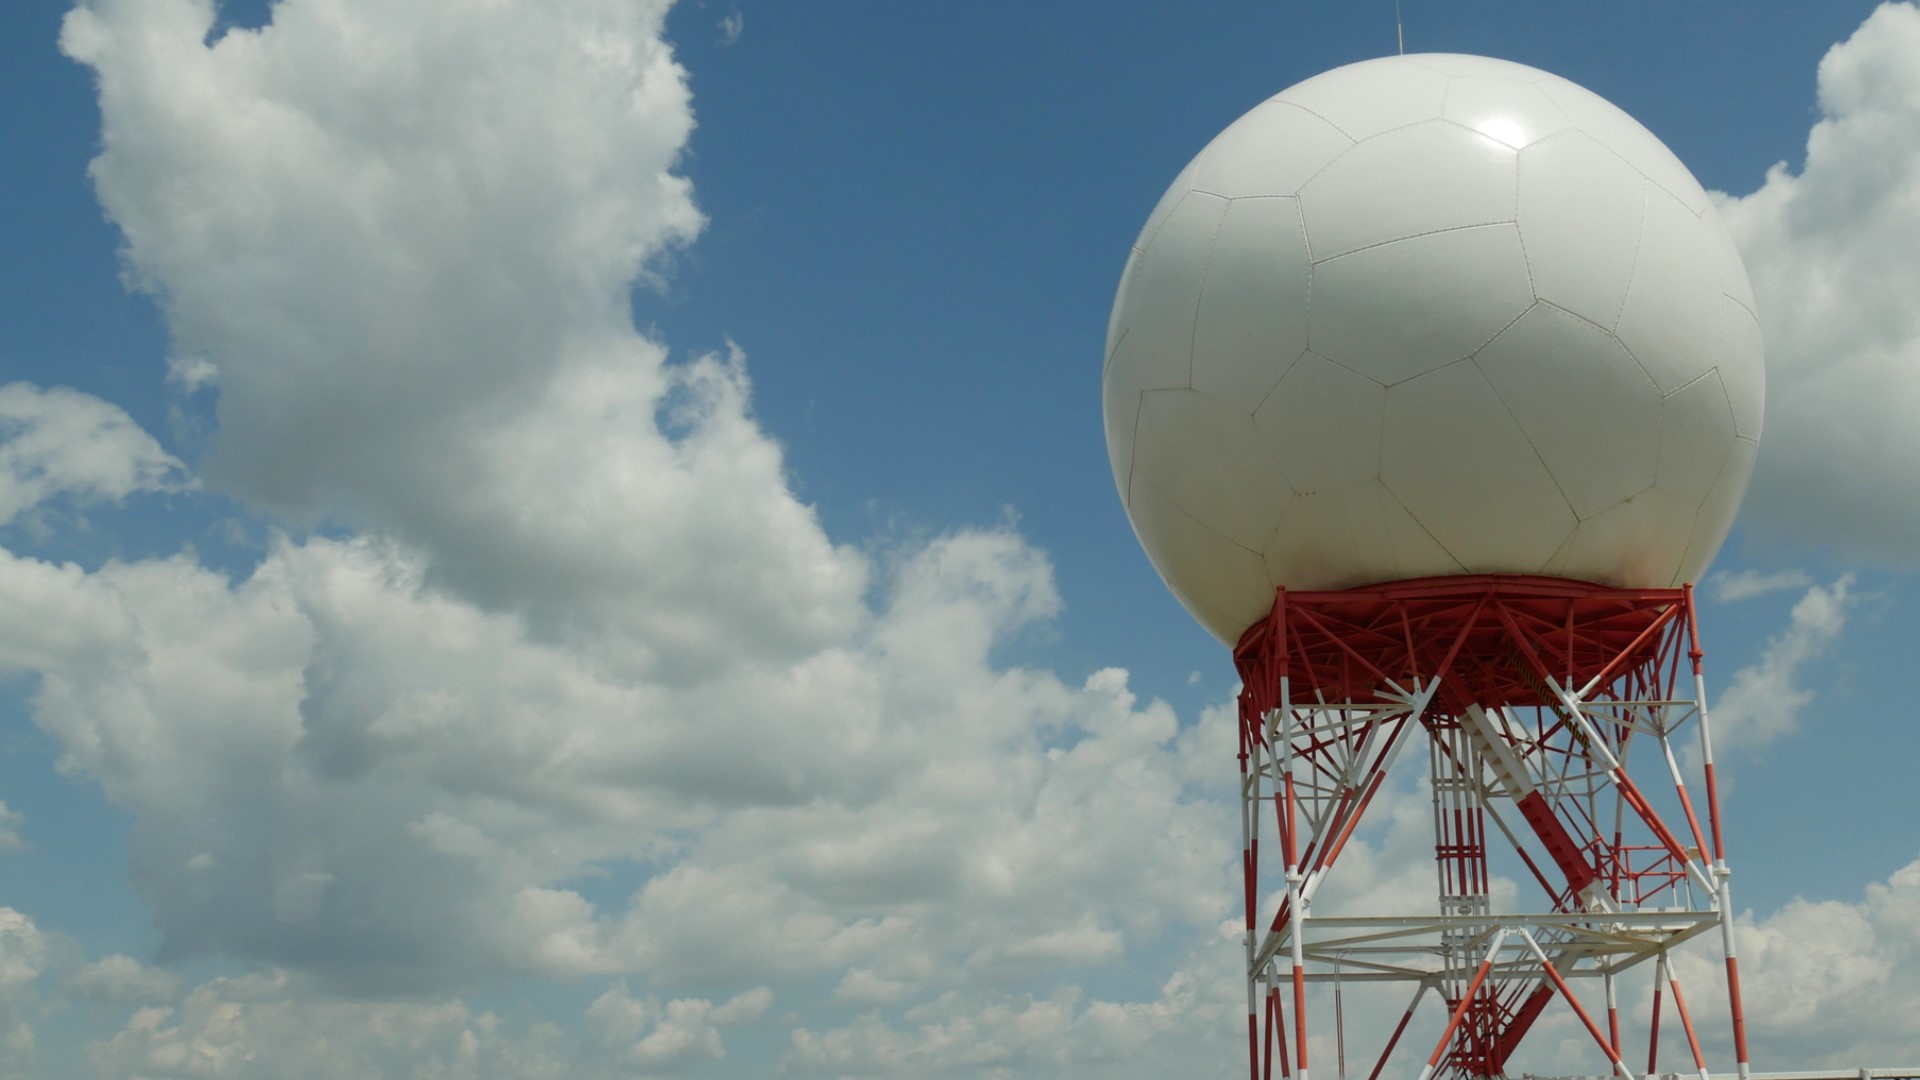 National weather radar system upgrades are on track